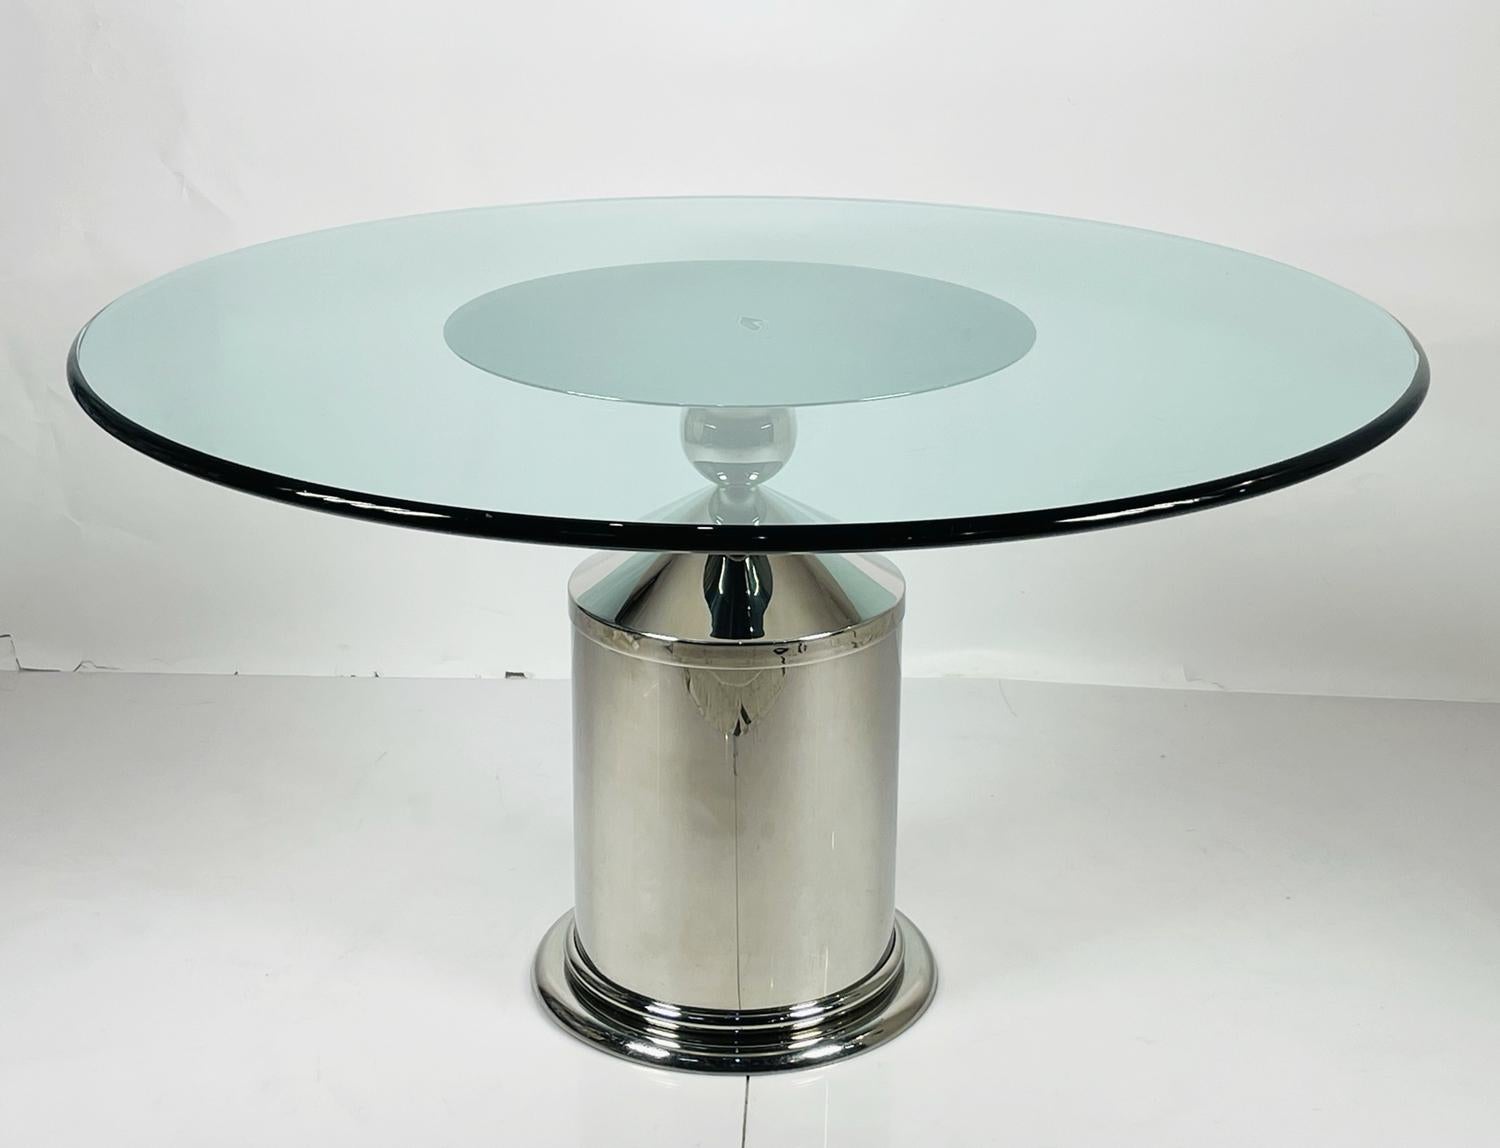 Stunning pedestal dining table designed by J. Wade Beam and manufactured by Brueton and part of the 